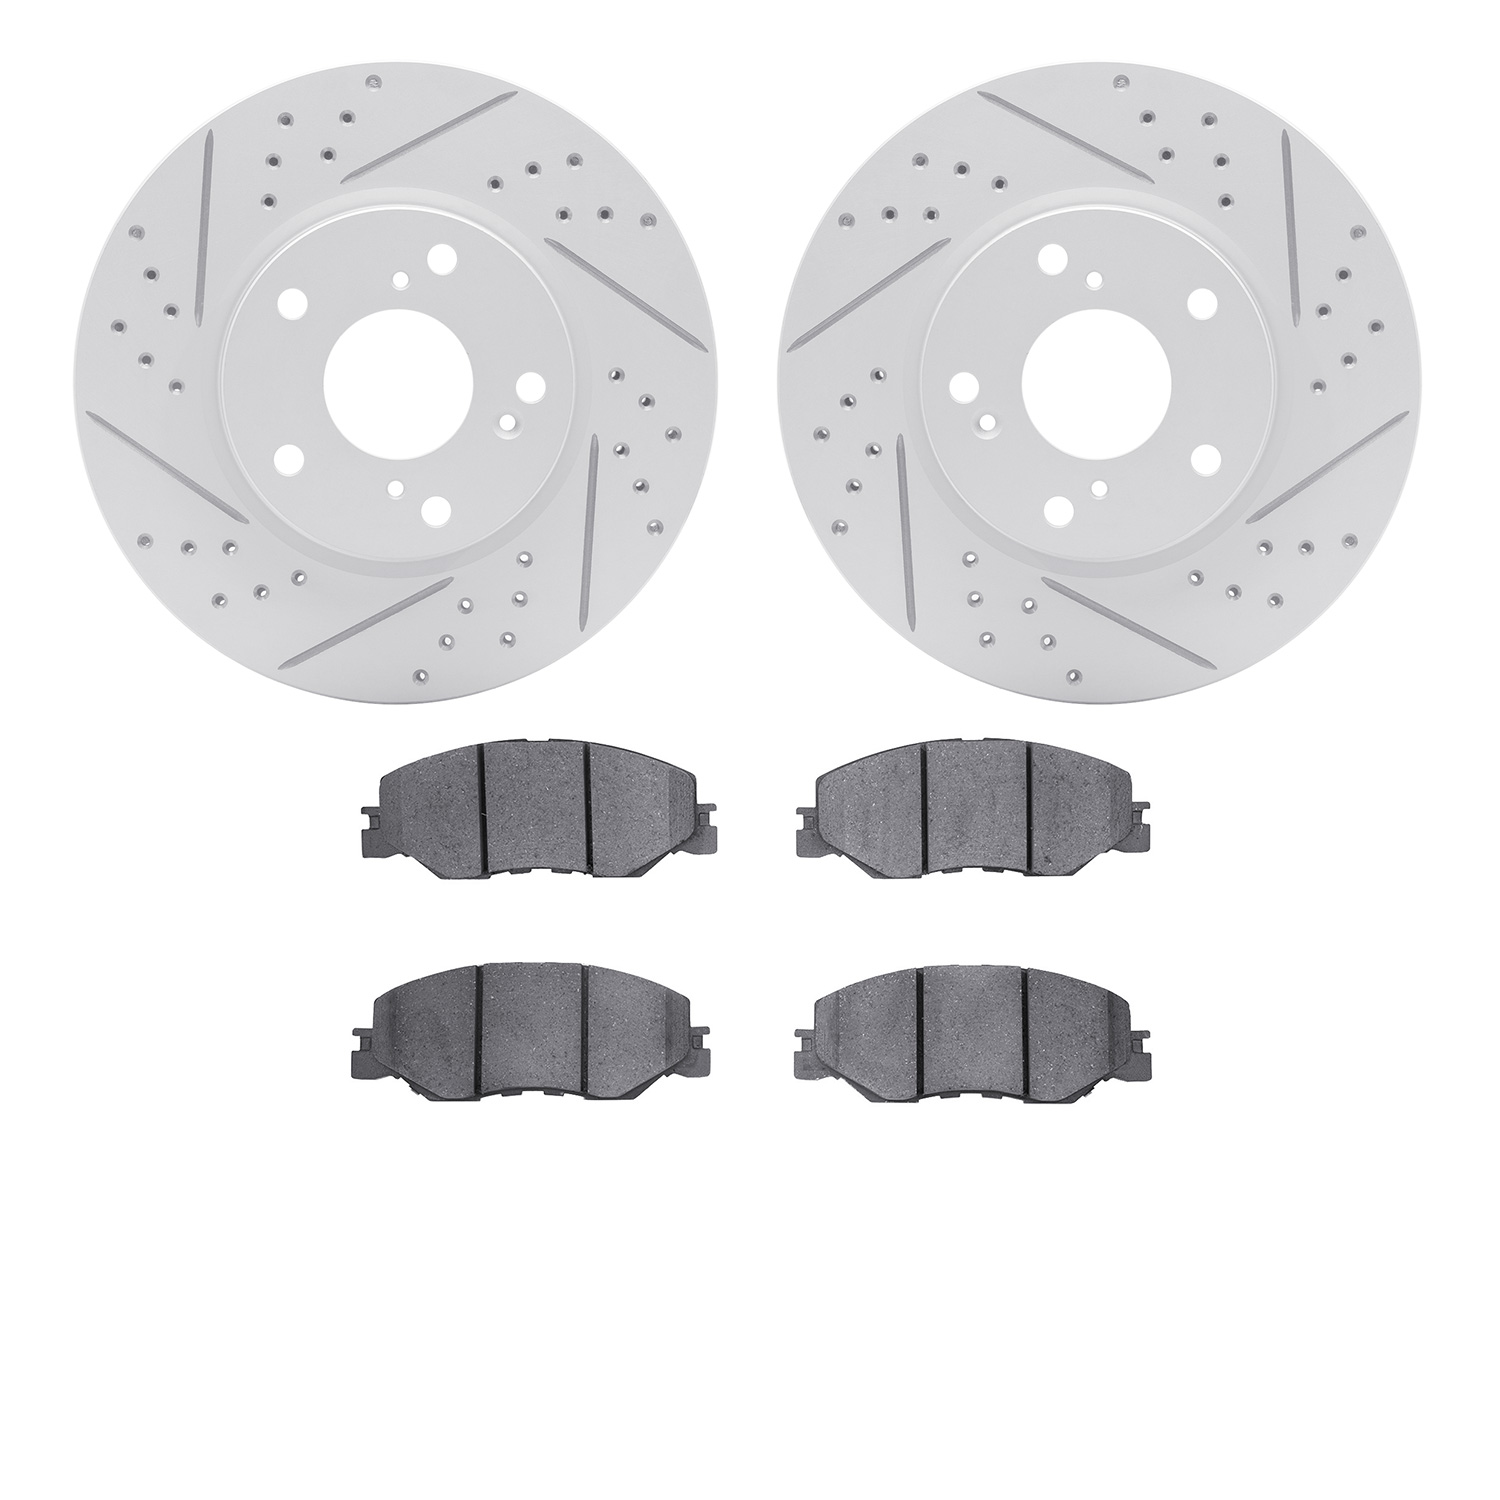 2502-59094 Geoperformance Drilled/Slotted Rotors w/5000 Advanced Brake Pads Kit, Fits Select Acura/Honda, Position: Front